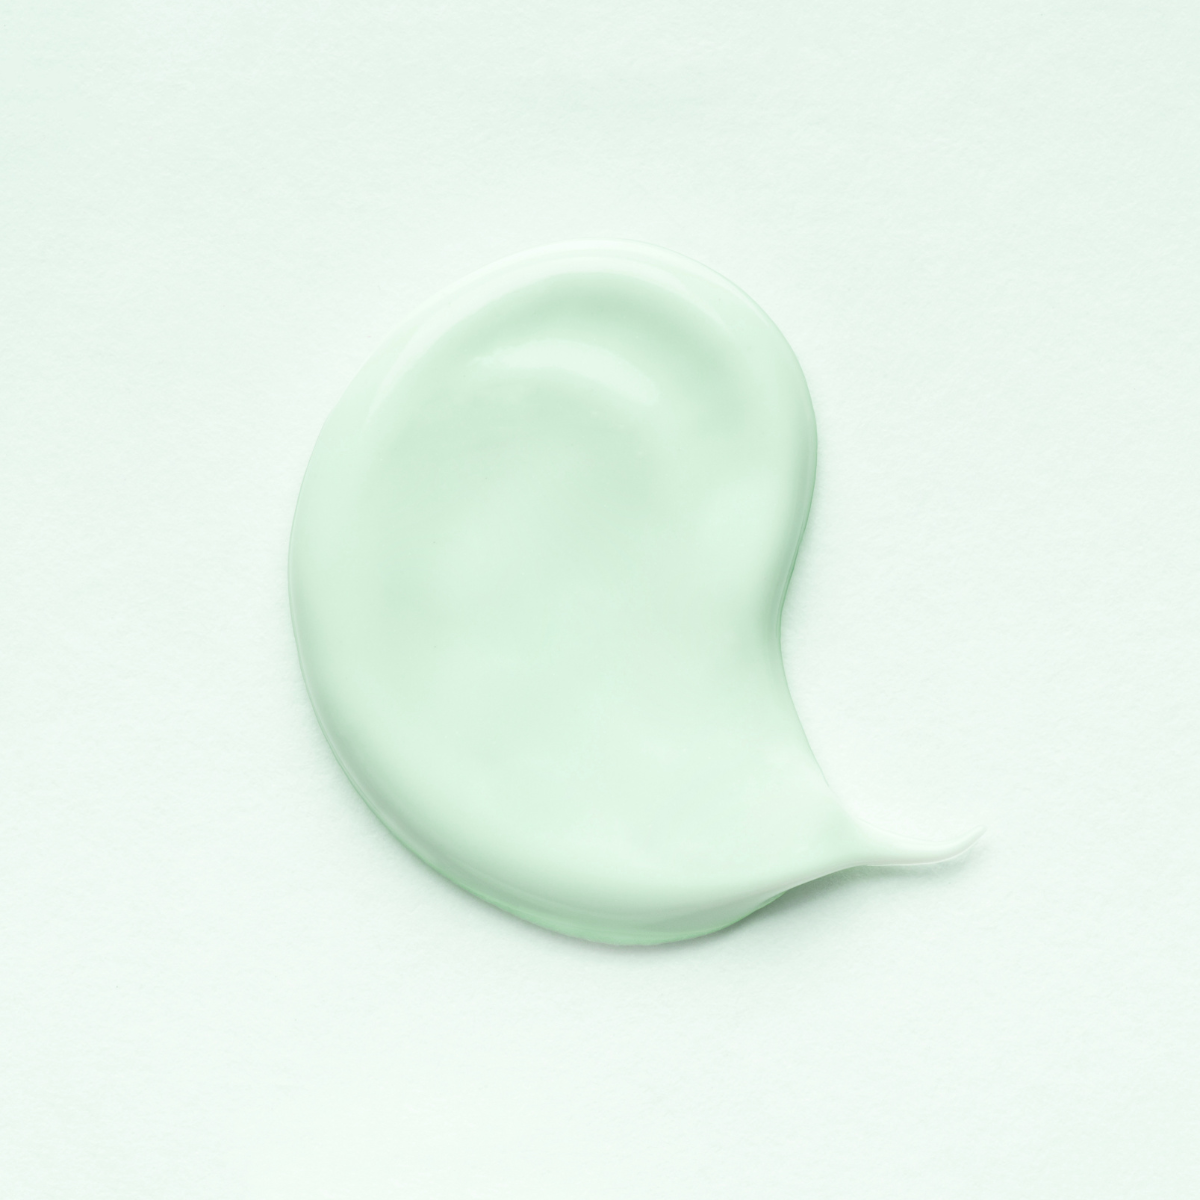 Pale green serum on a pale green background